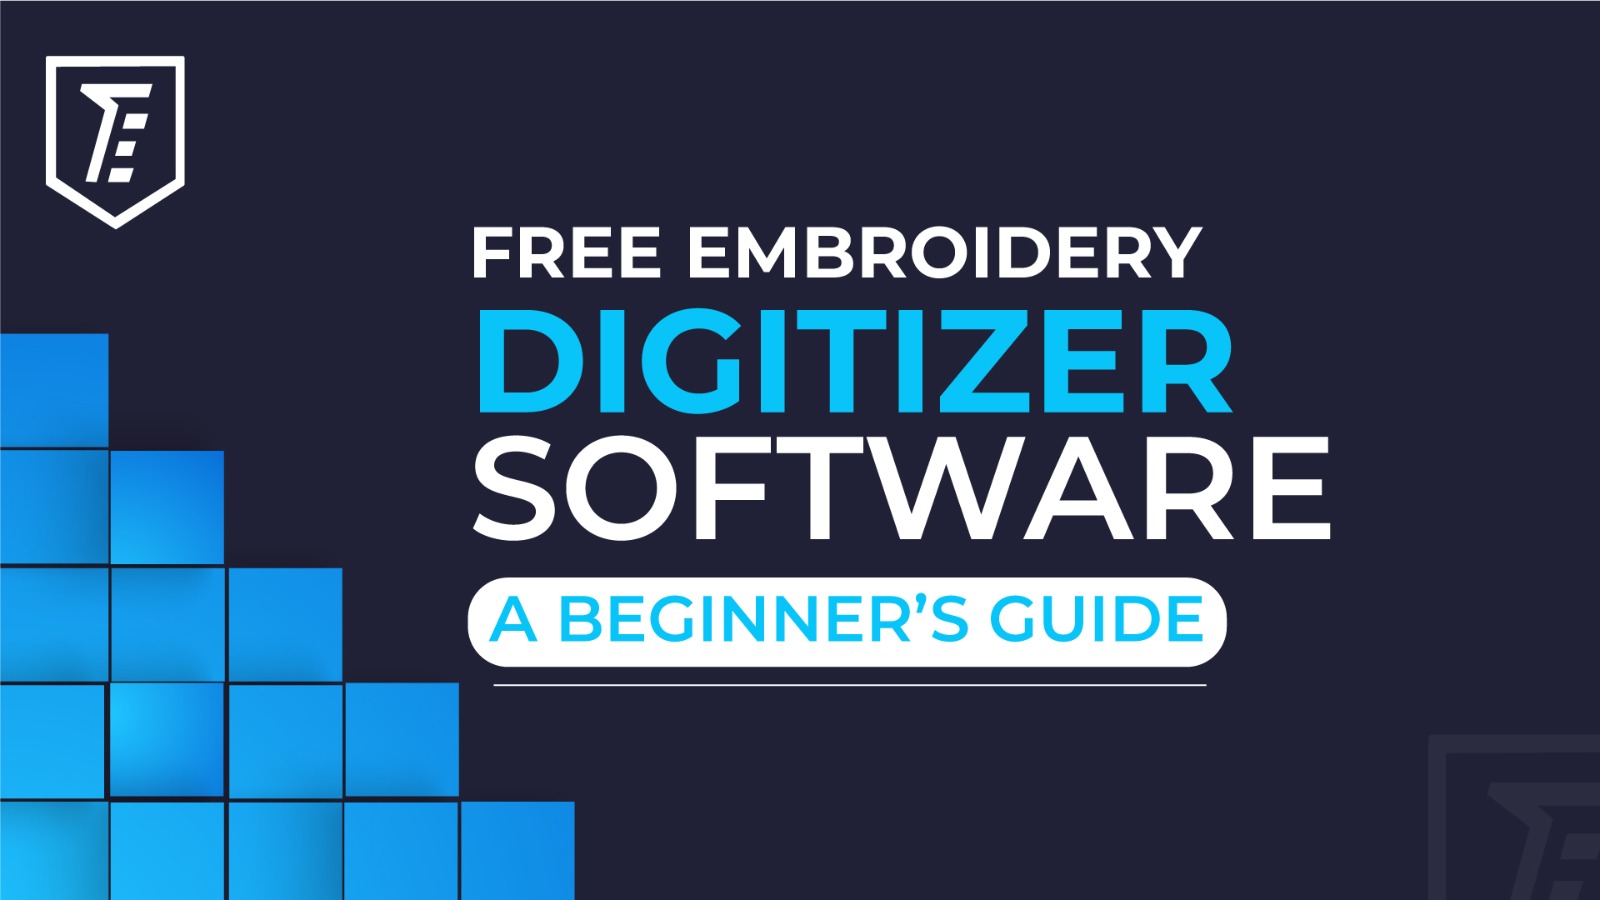 Free Embroidery Digitizer Software: A Beginner’s Guide